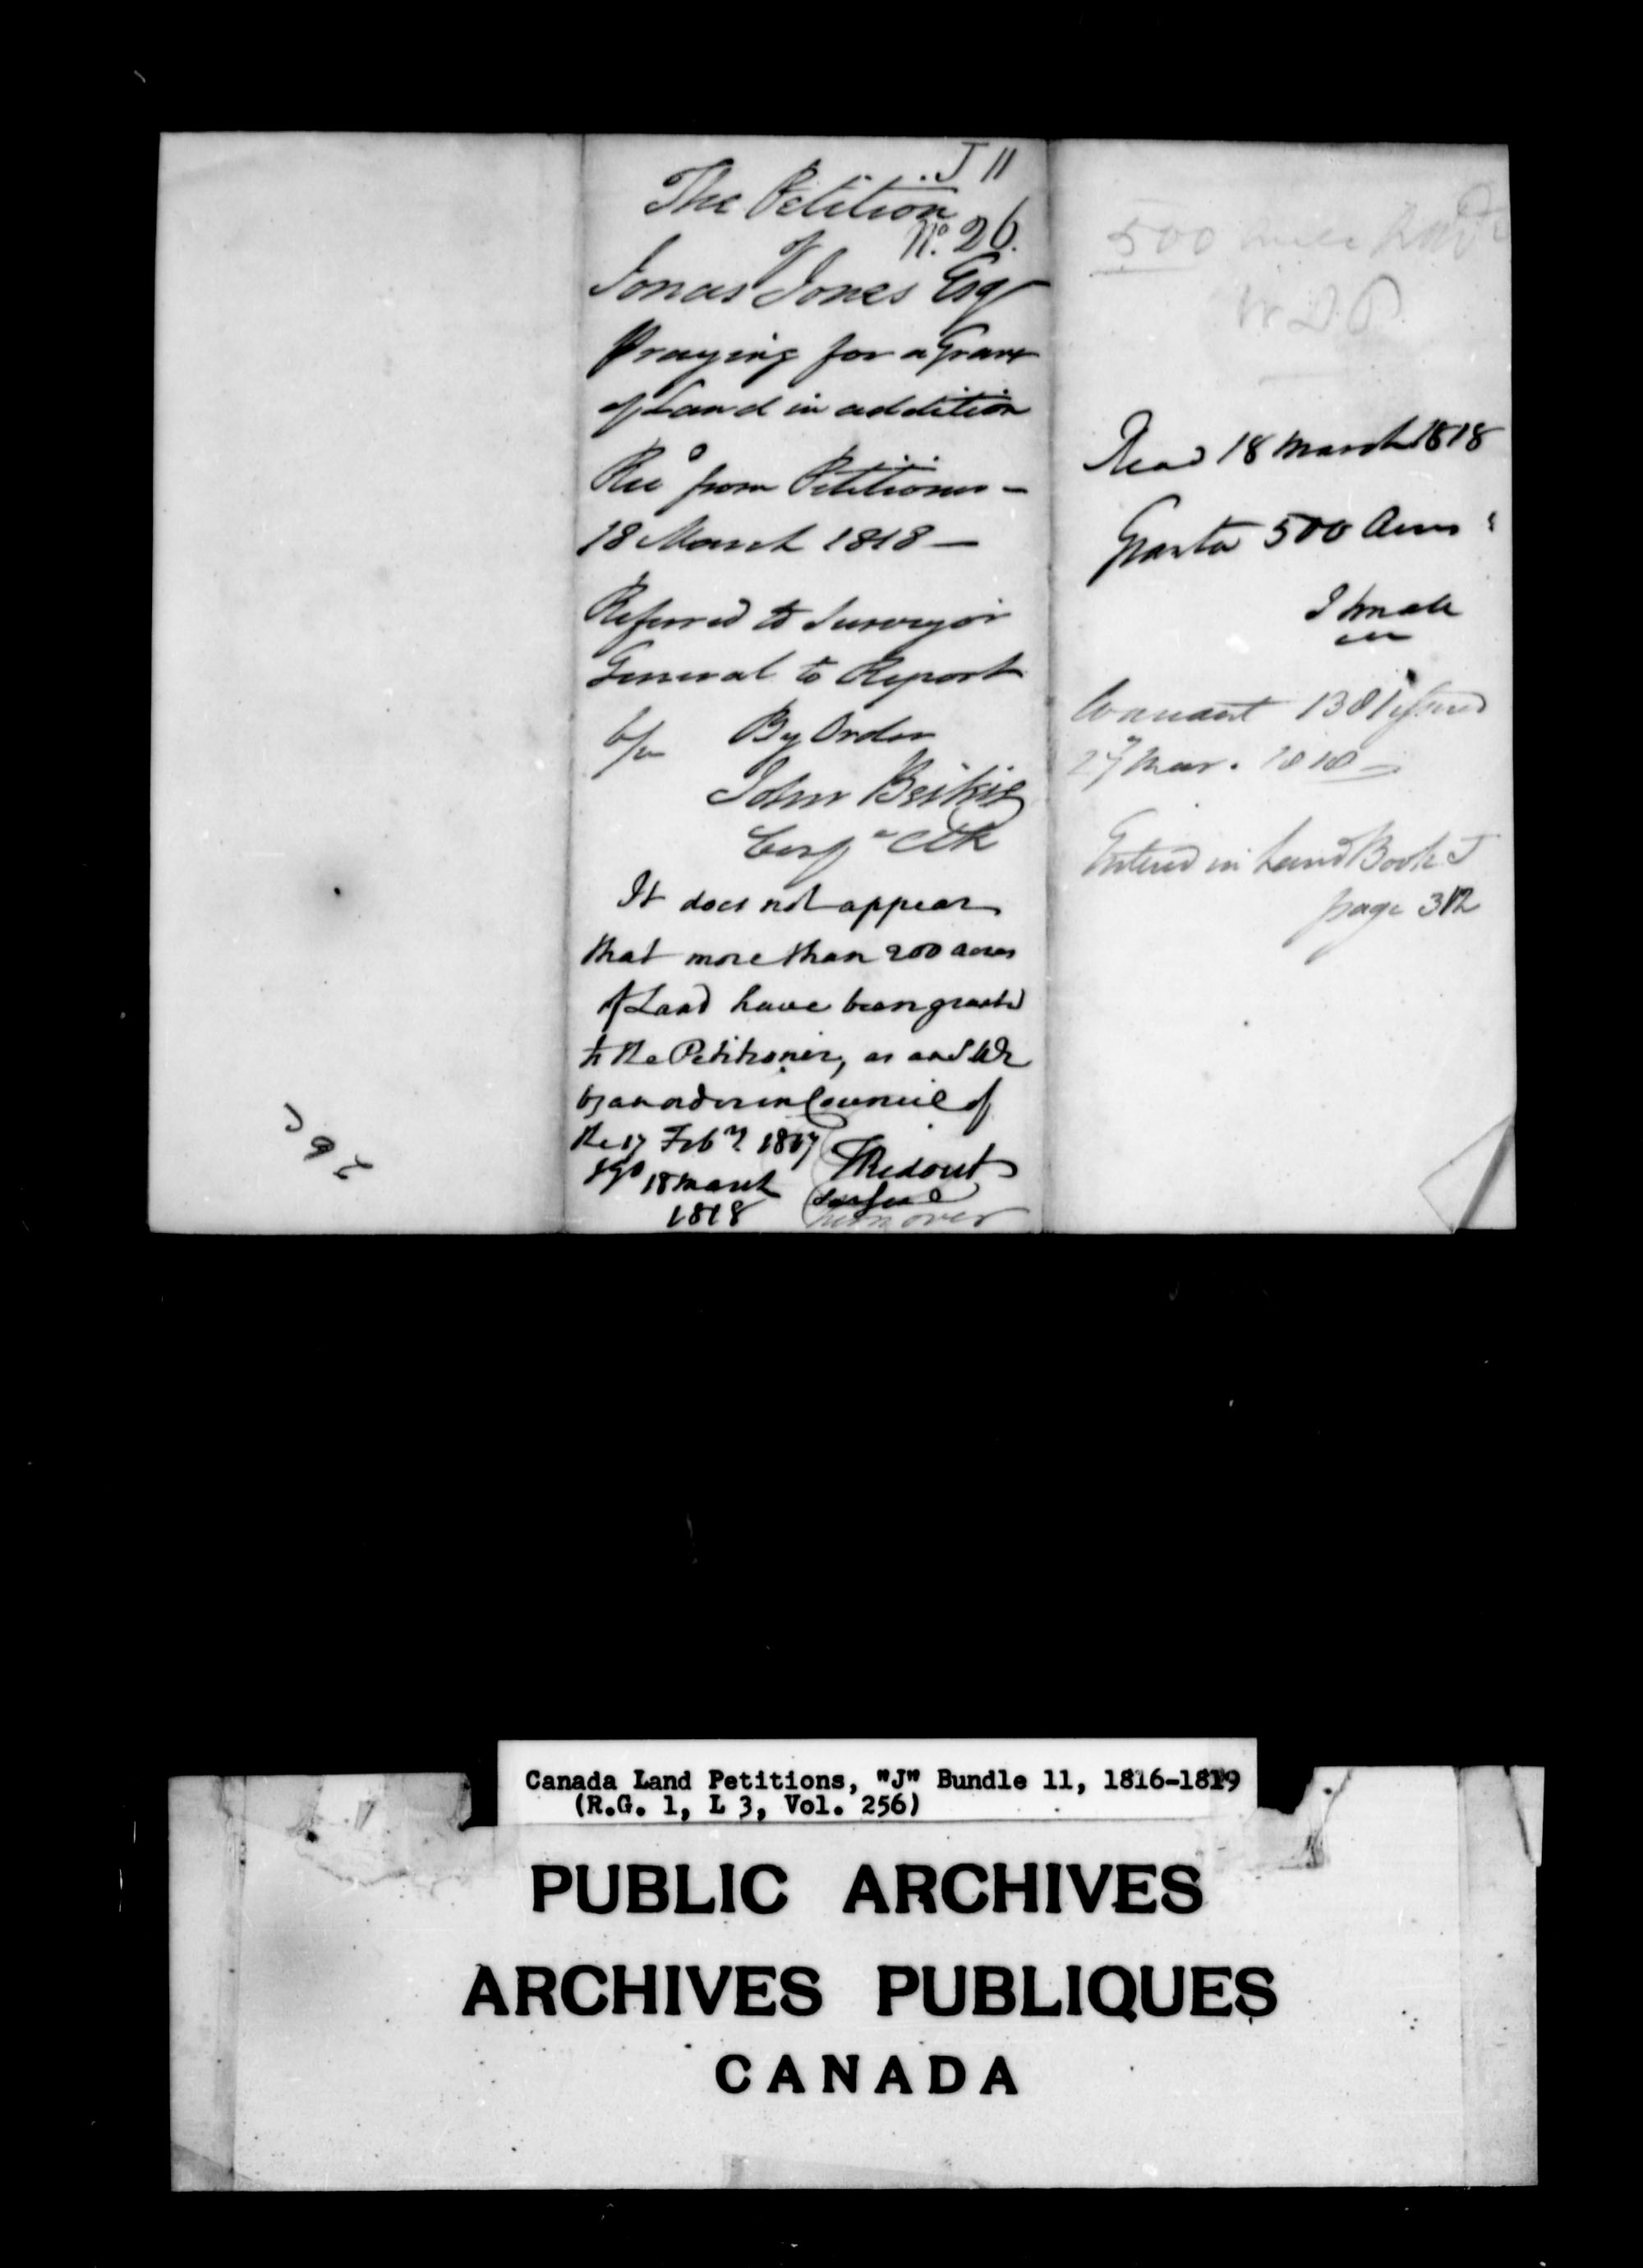 Title: Upper Canada Land Petitions (1763-1865) - Mikan Number: 205131 - Microform: c-2109